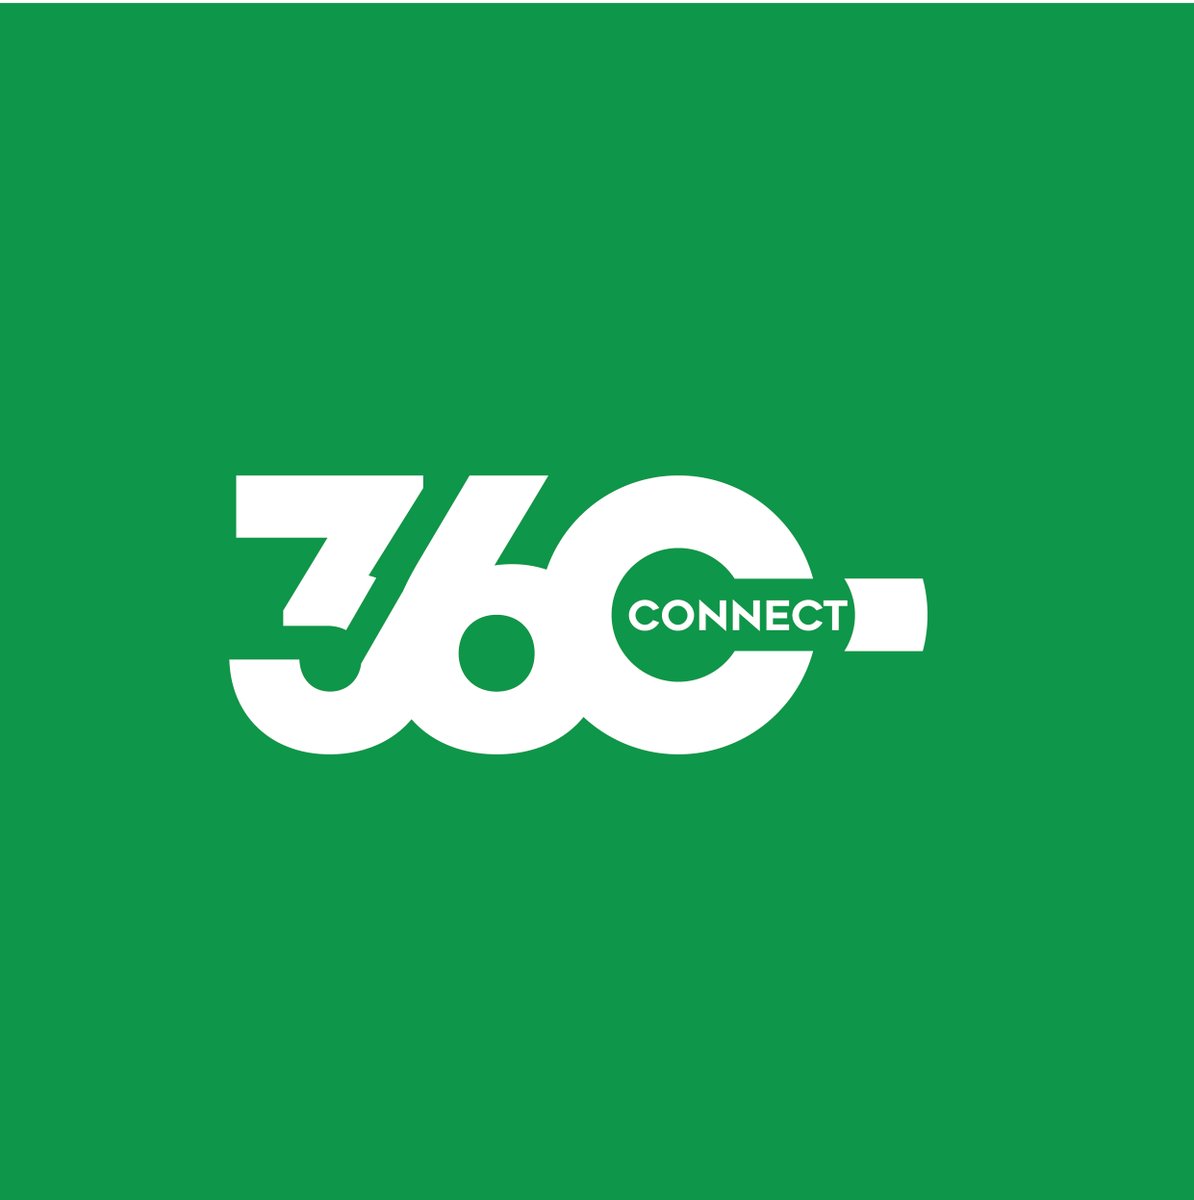 We're thrilled to announce the launch of 360 Connects Twitter! Follow us for insights, tips, and updates on empowering agribusiness and finance in Tanzania. Let's connect and grow together! 🌱 #360Connects #Agribusiness #Finance #Tanzania